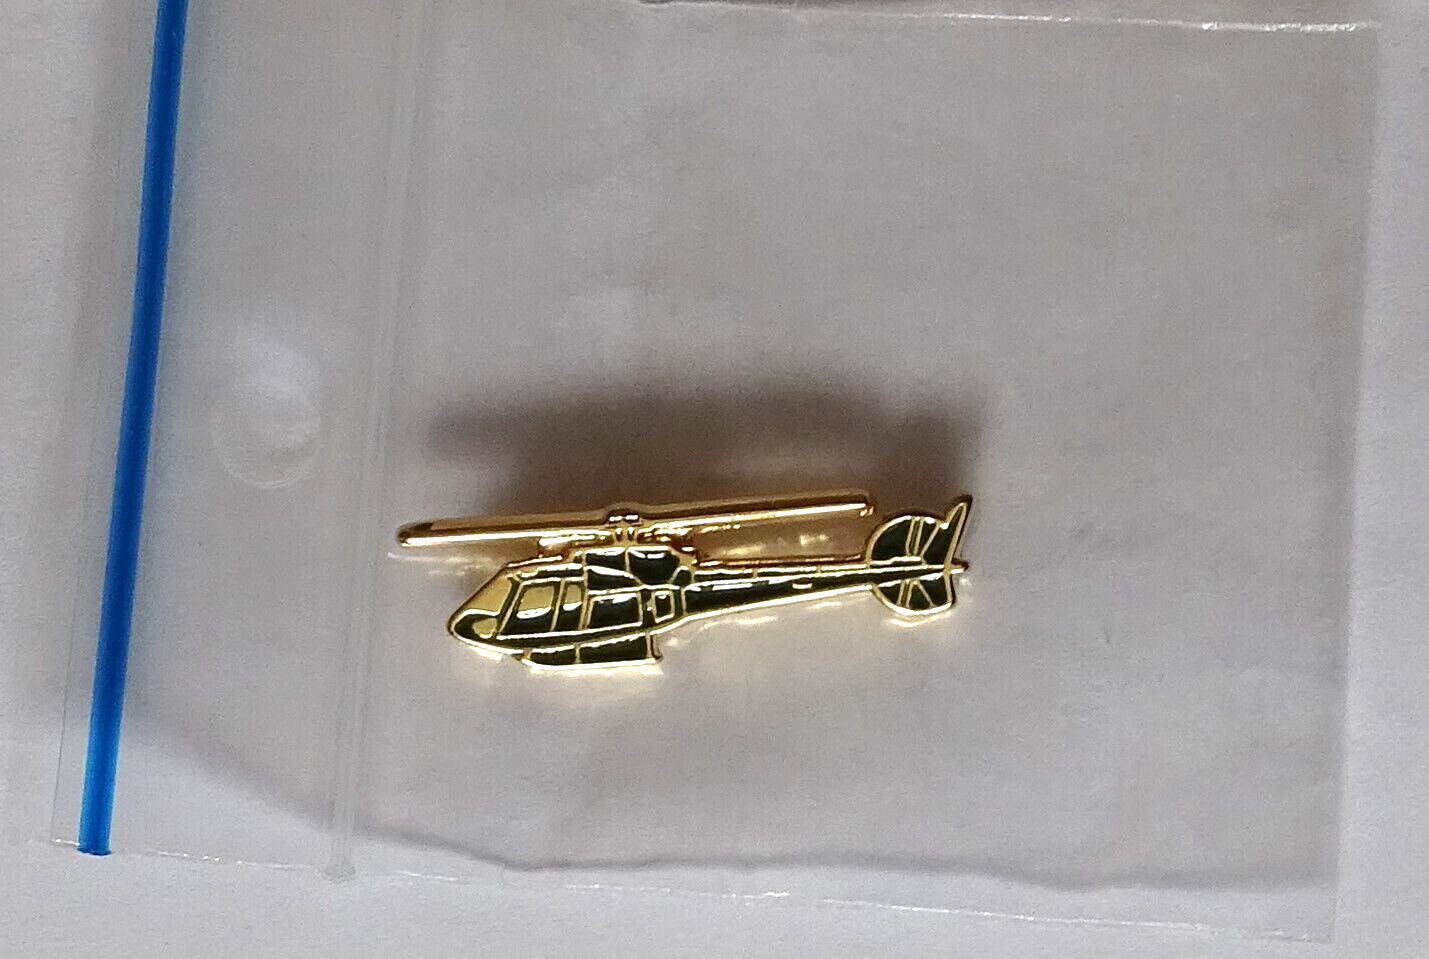 H125 / AS350 HELICOPTER Green/Gold finish Lapel/Hat Pin EUROCOPTER AIRBUS ASTAR